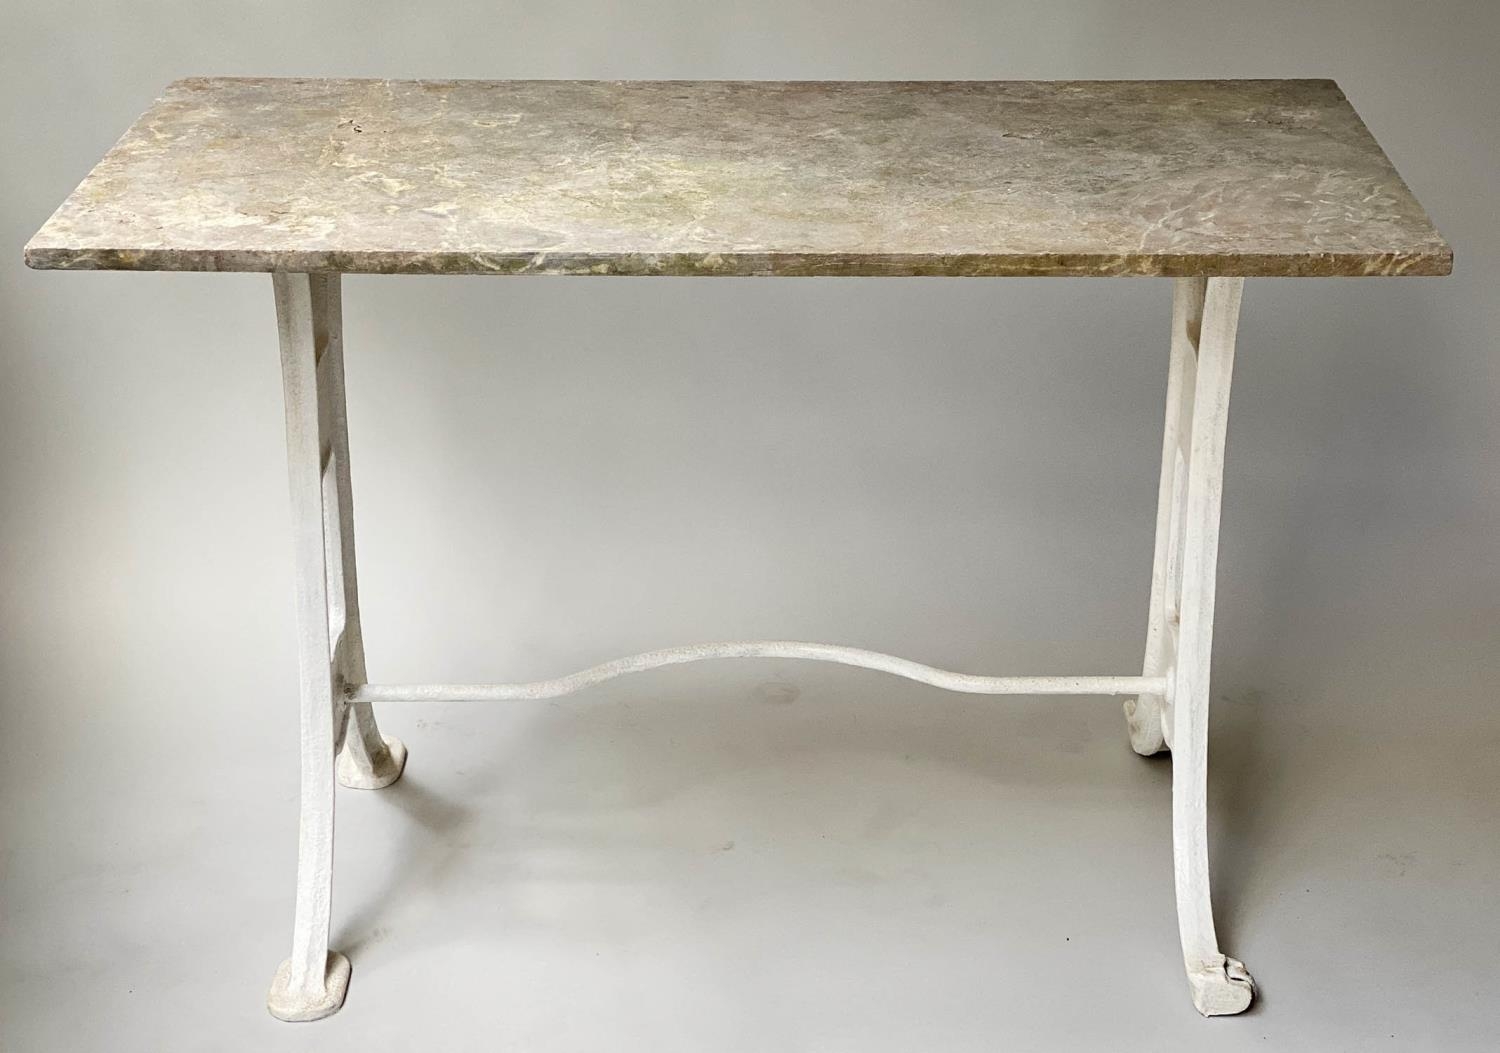 GARDEN TABLE, early 20th century rectangular variegated weathered marble on cast iron strechered